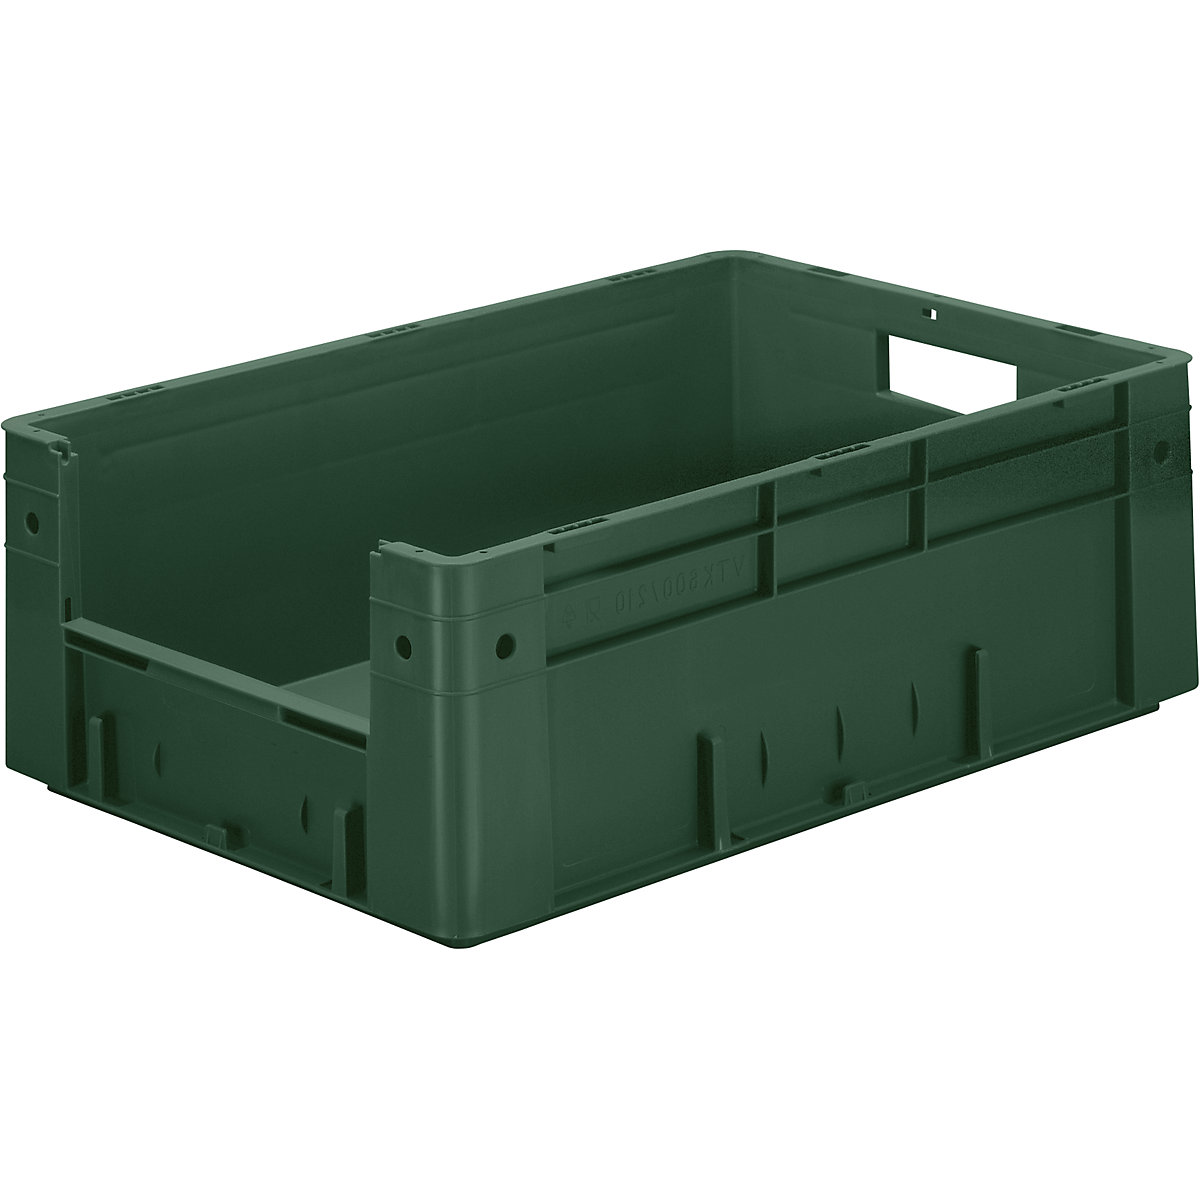 Euro stacking container, capacity 38 l, LxWxH 600 x 400 x 210 mm, pack of 2, green-3